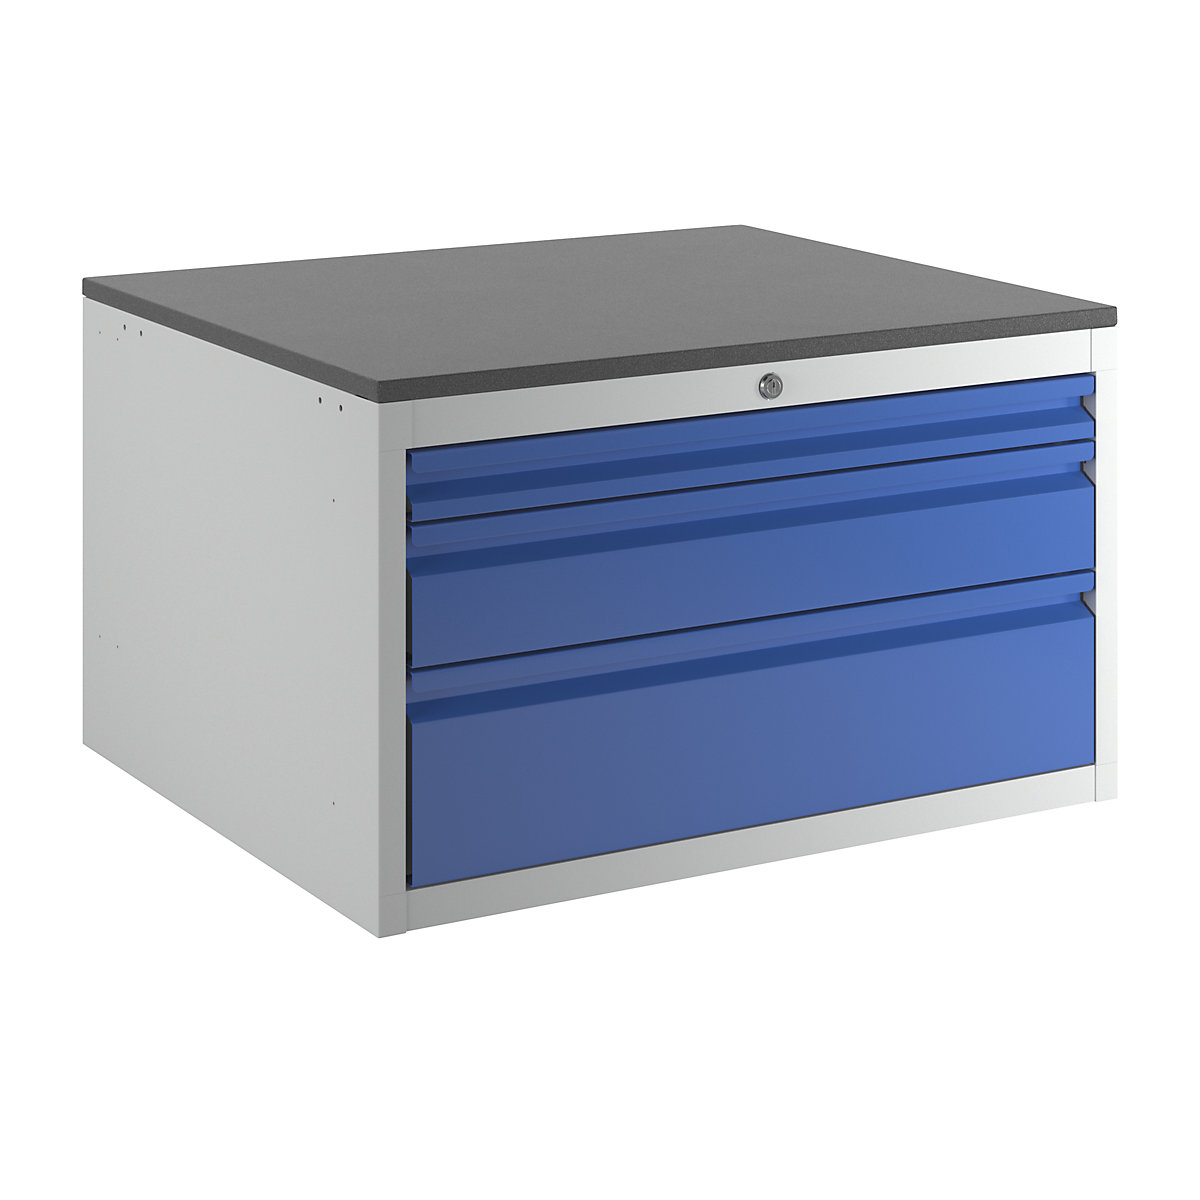 Drawer cupboard with telescopic guides – RAU, height 460 mm, drawers: 1 x 60, 1 x 120, 1 x 180 mm, light grey / gentian blue, width 770 mm-12